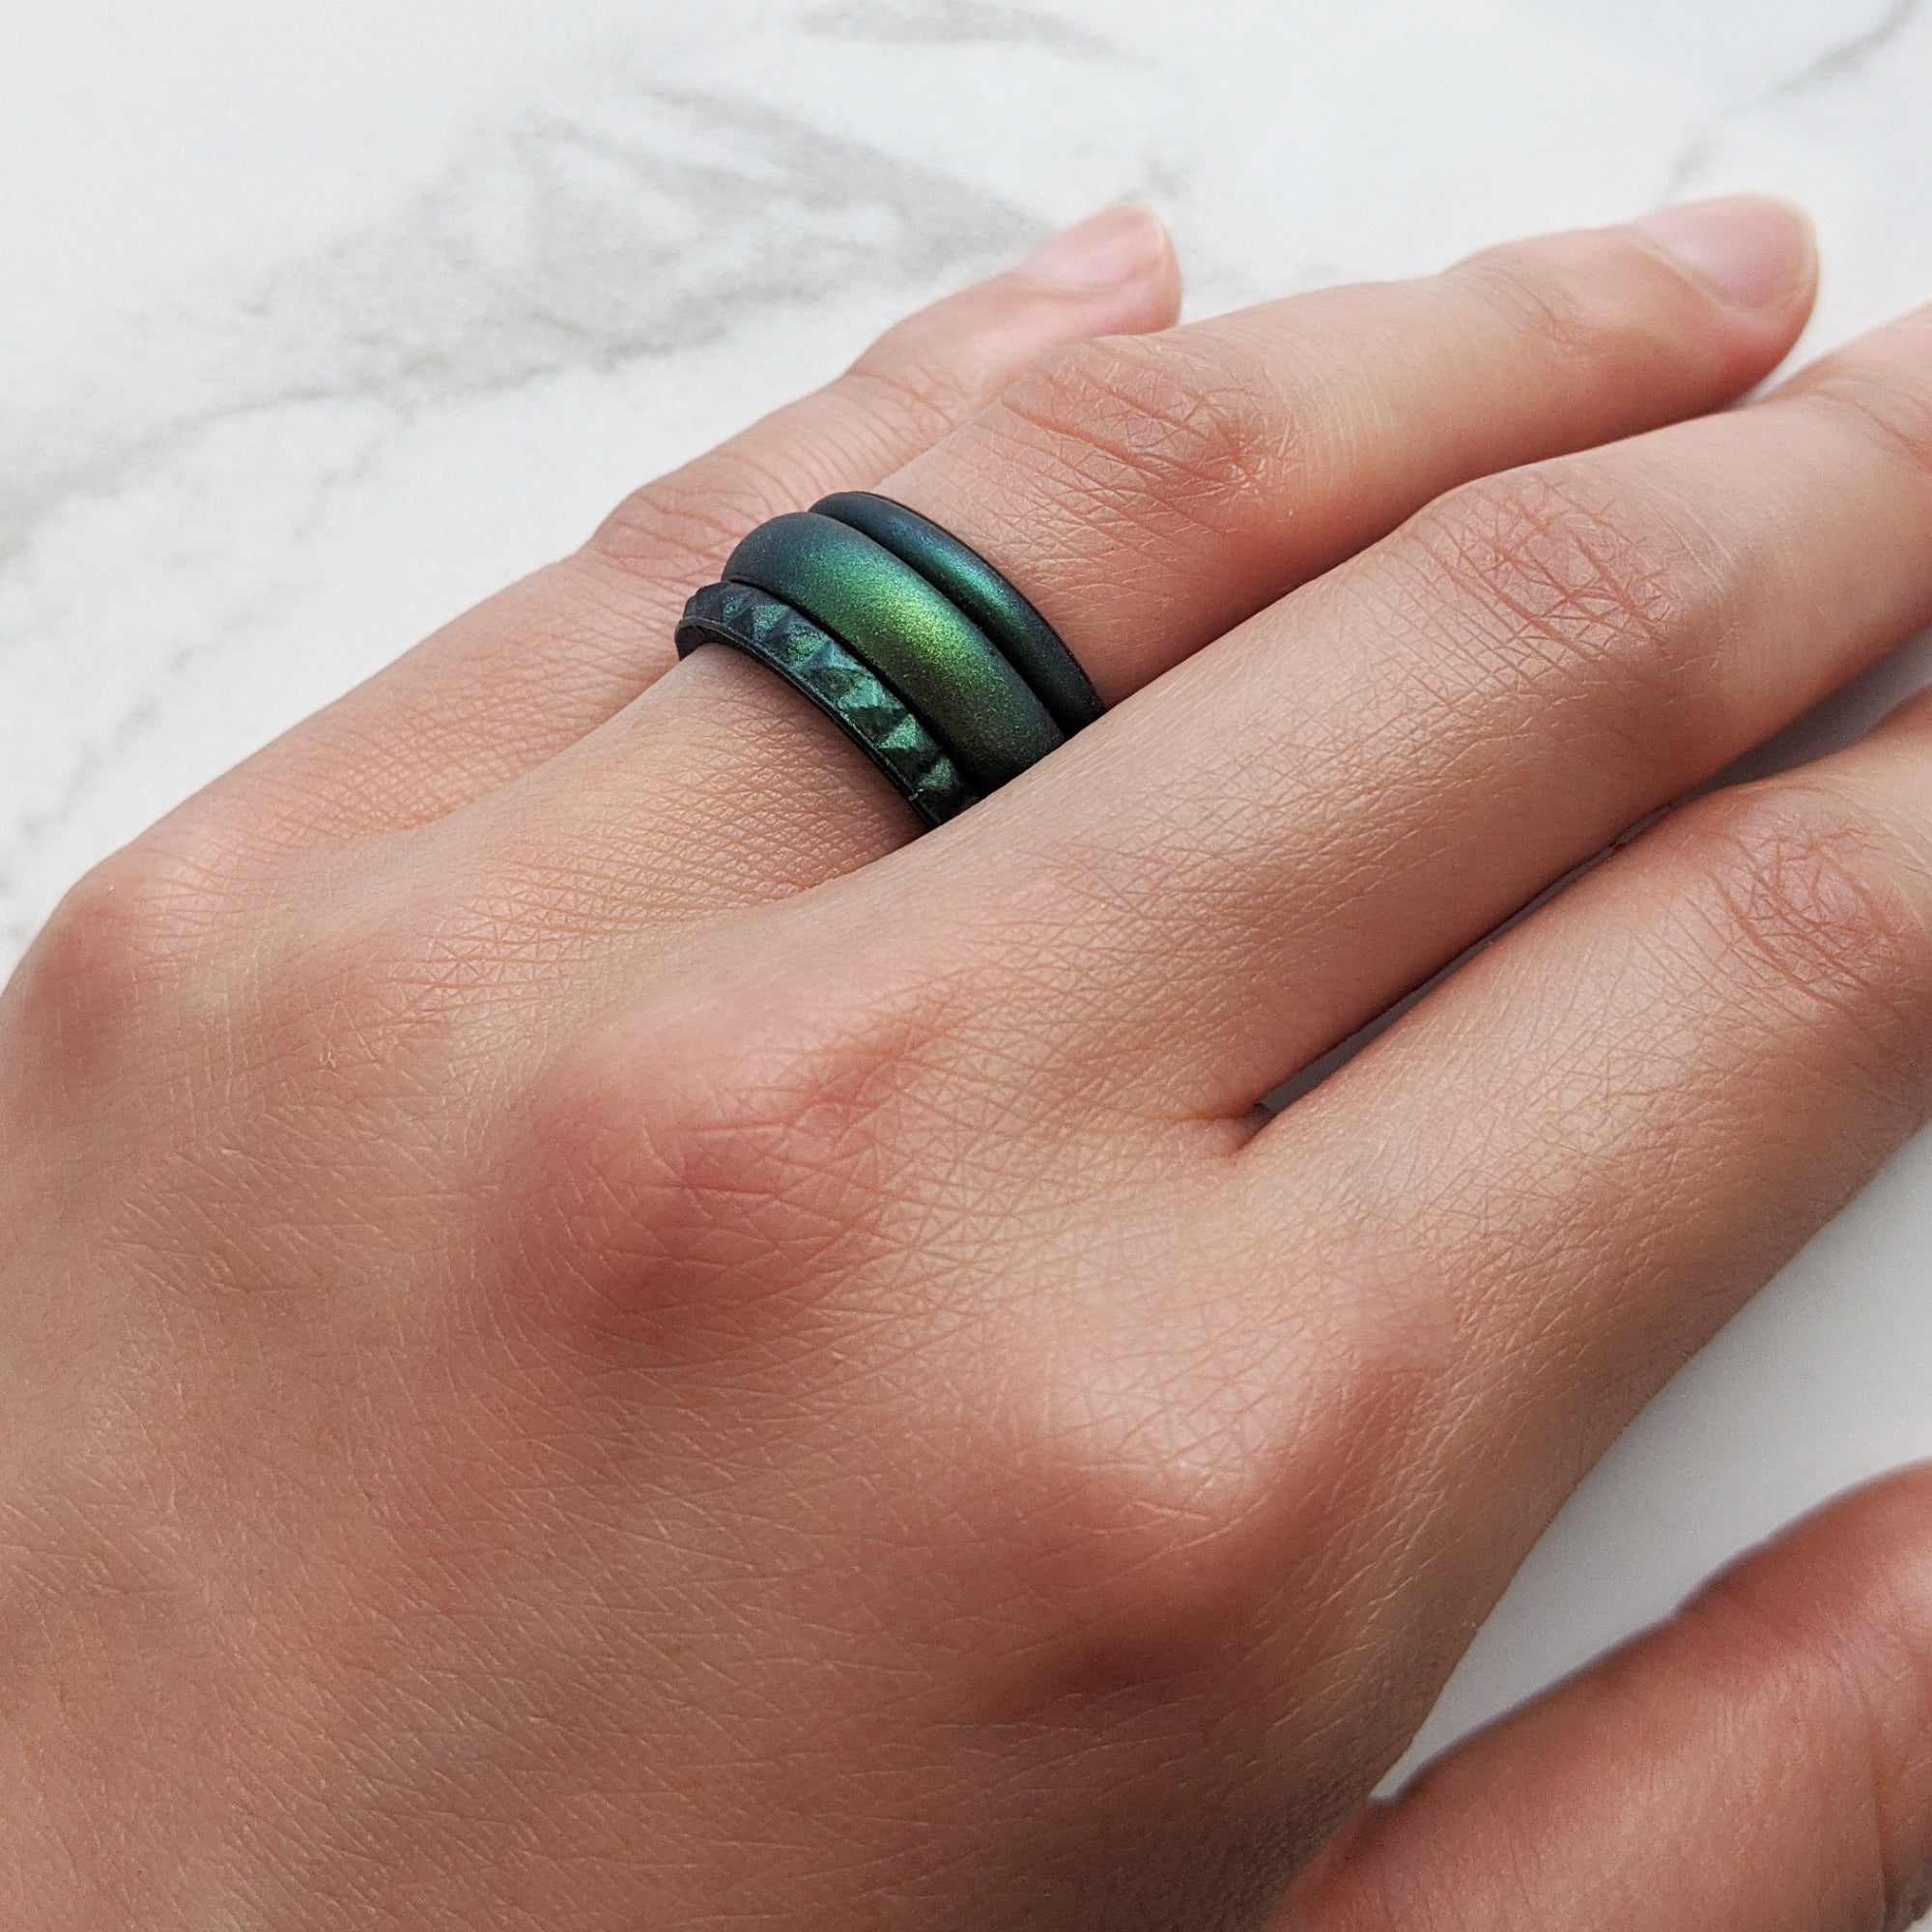 Enchanted Forest Emerald Green Breathable Silicone Ring for Men and Women - Knot Theory